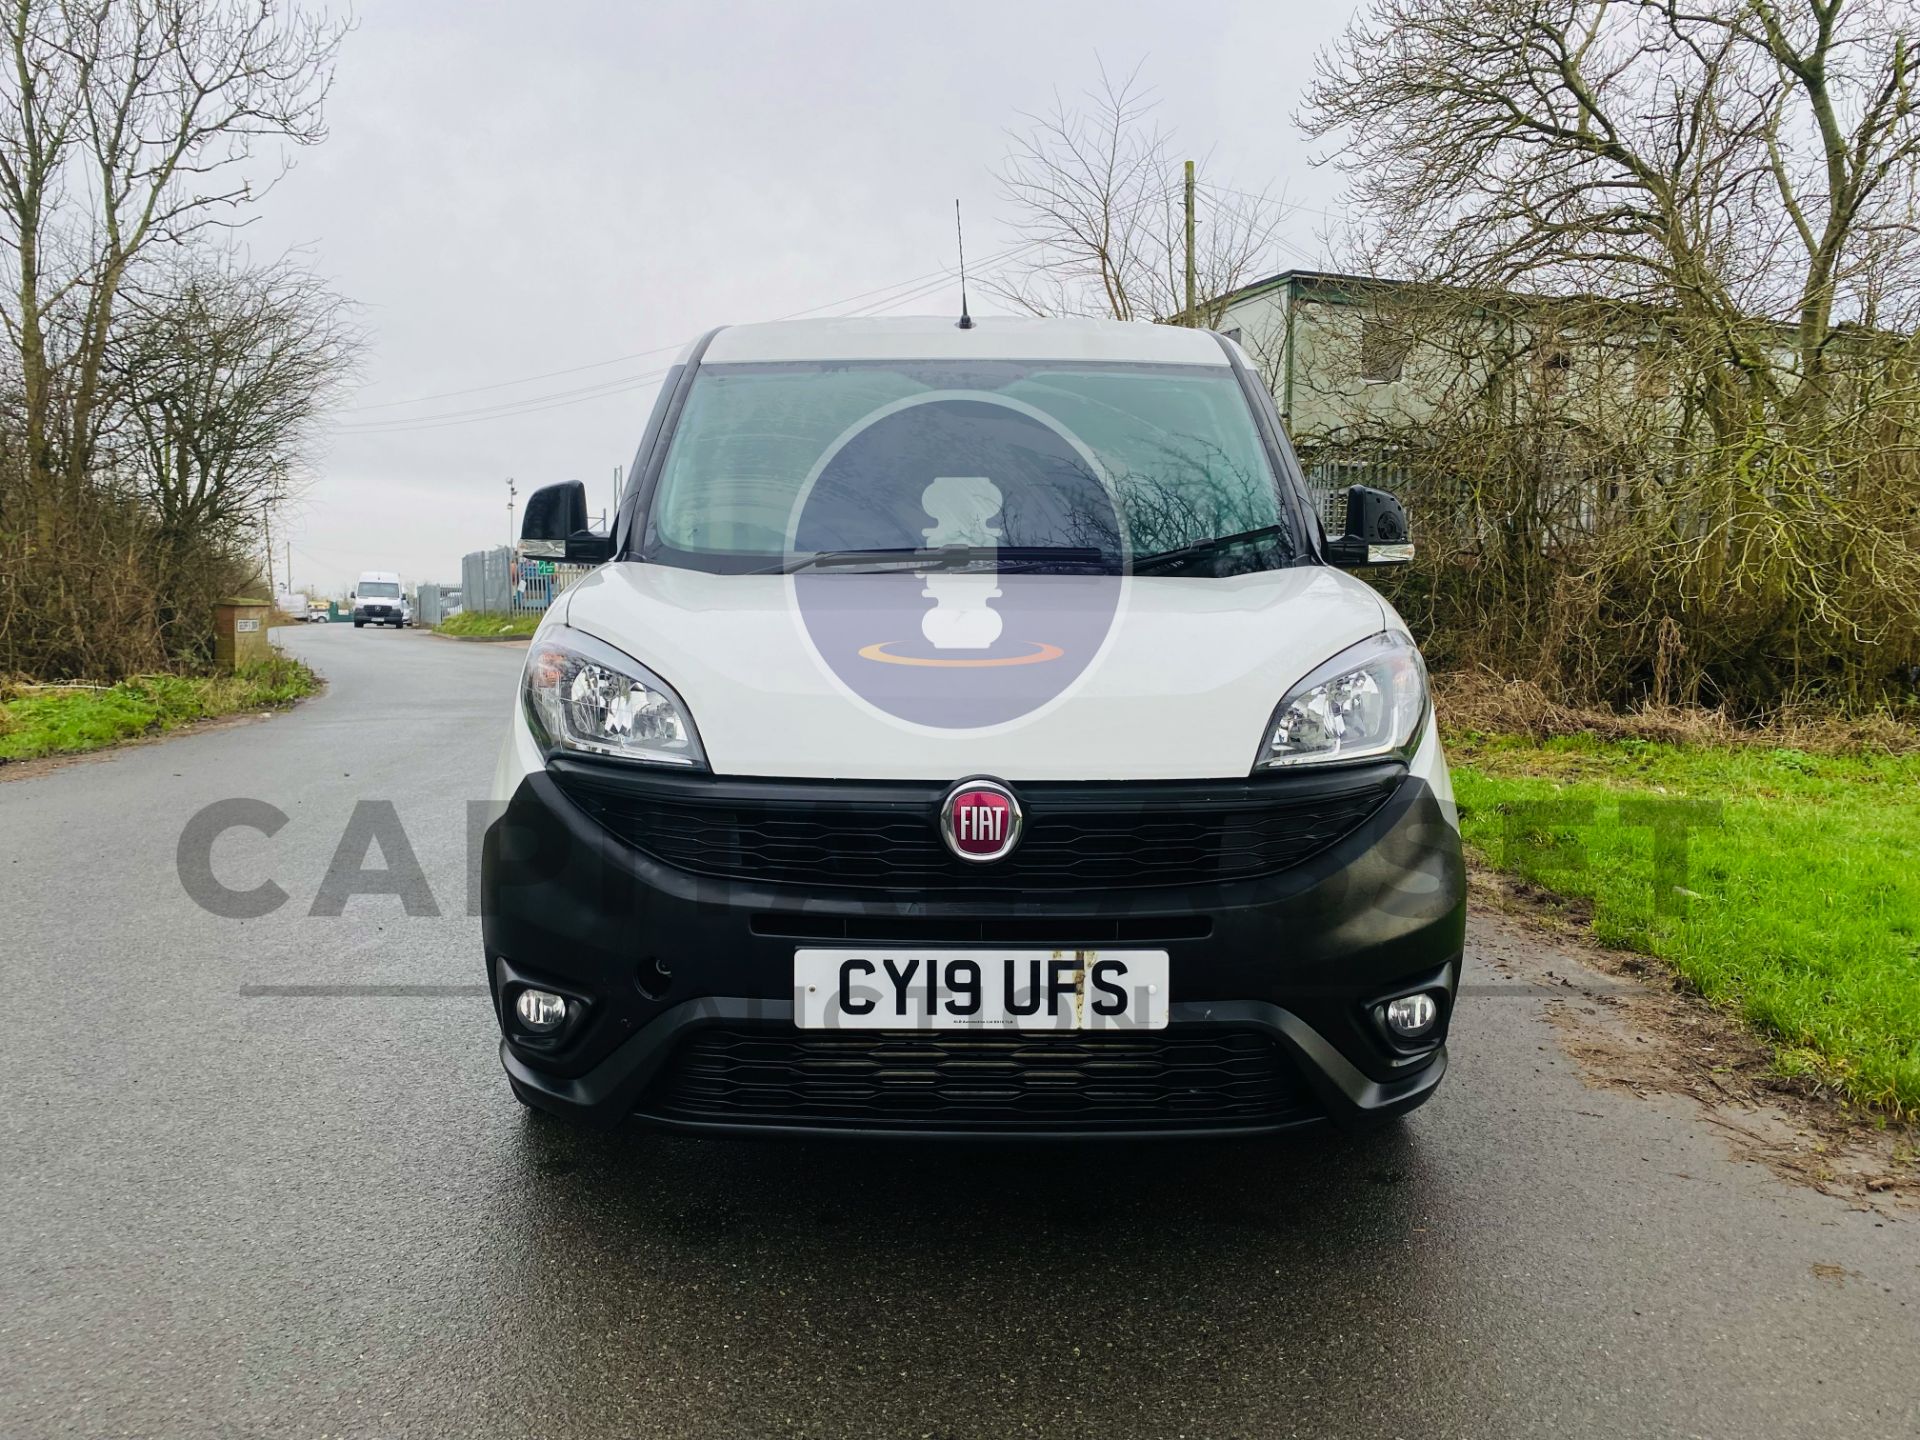 FIAT DOBLO 1.6 MULTIJET LWB "EURO 6" AIR CON - ONLY 46793 MILES! - 19 REG - (NEW SHAPE) - - Image 3 of 23